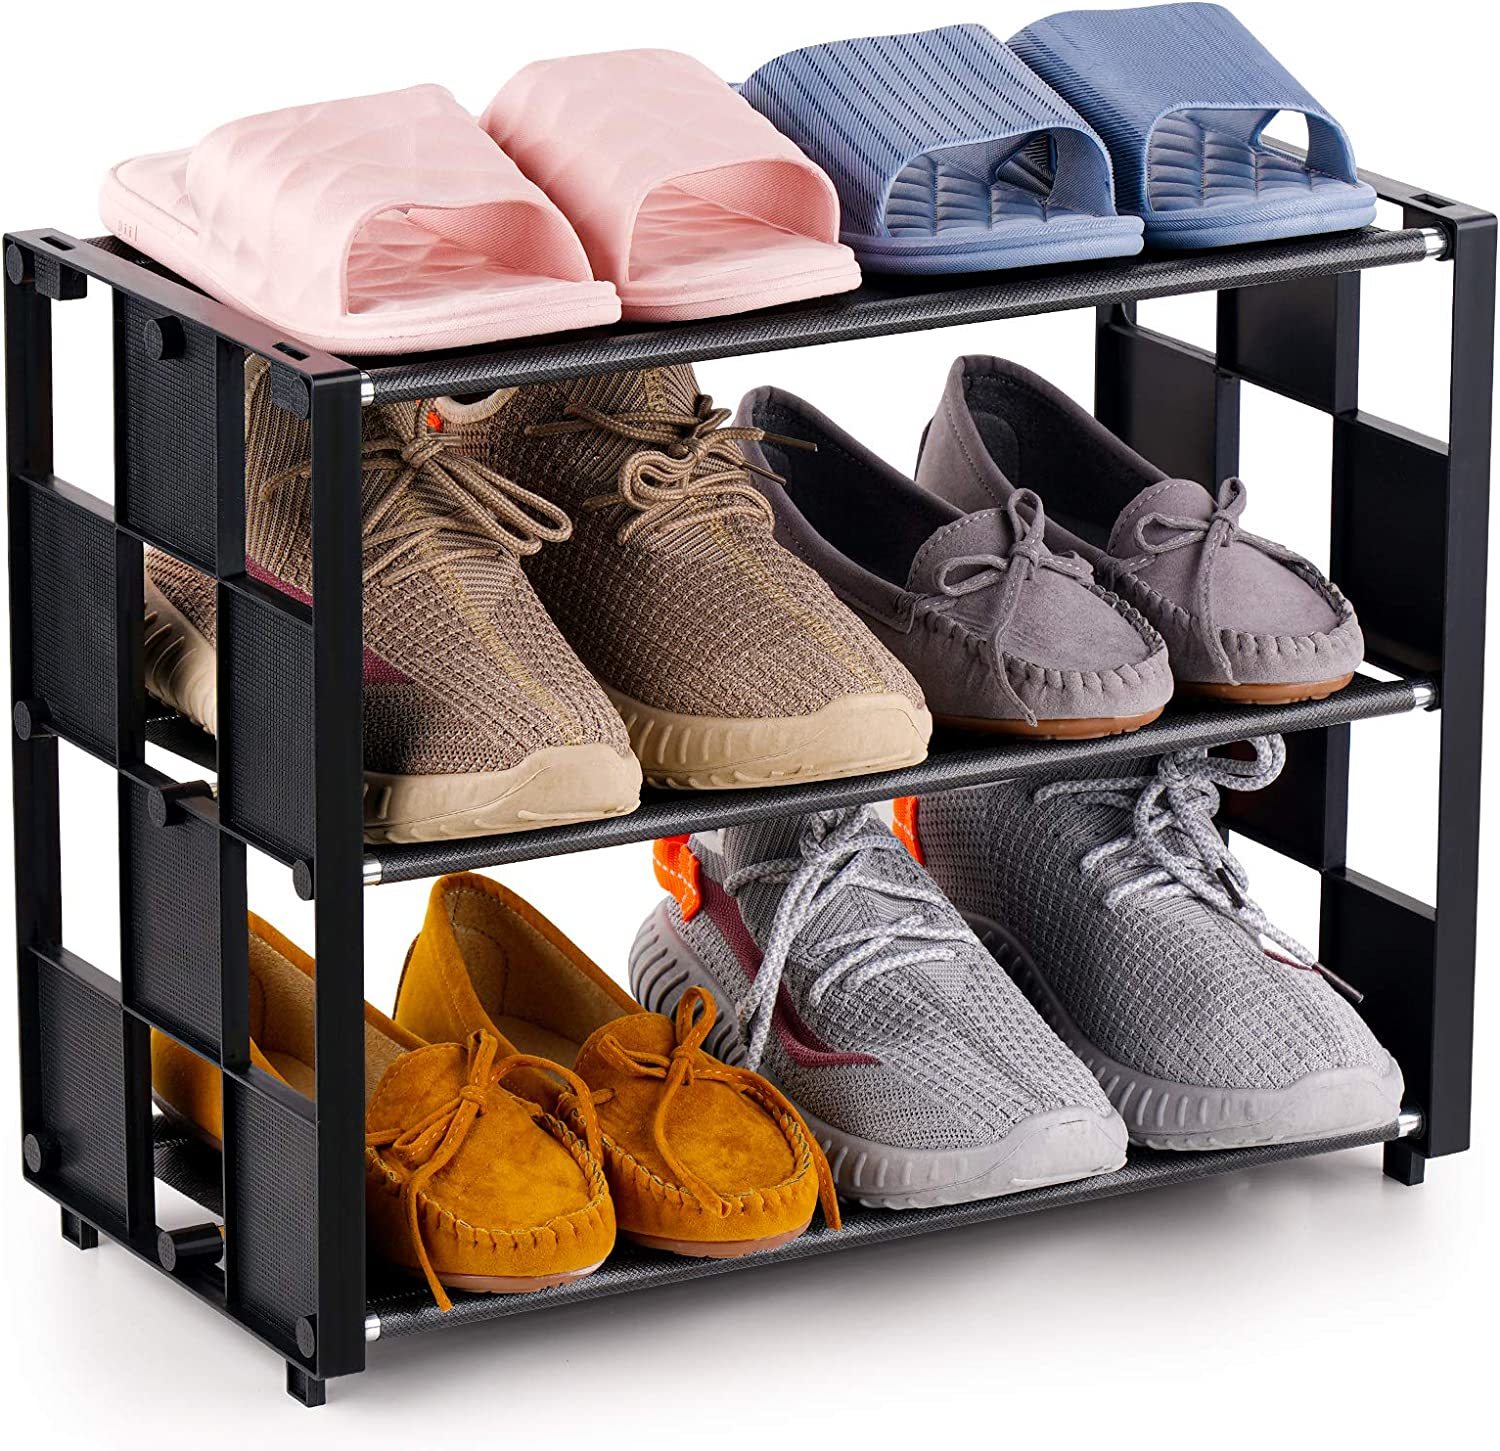  MAGINELS 6 Tier Shoe Rack Organizer with Cover, Slim